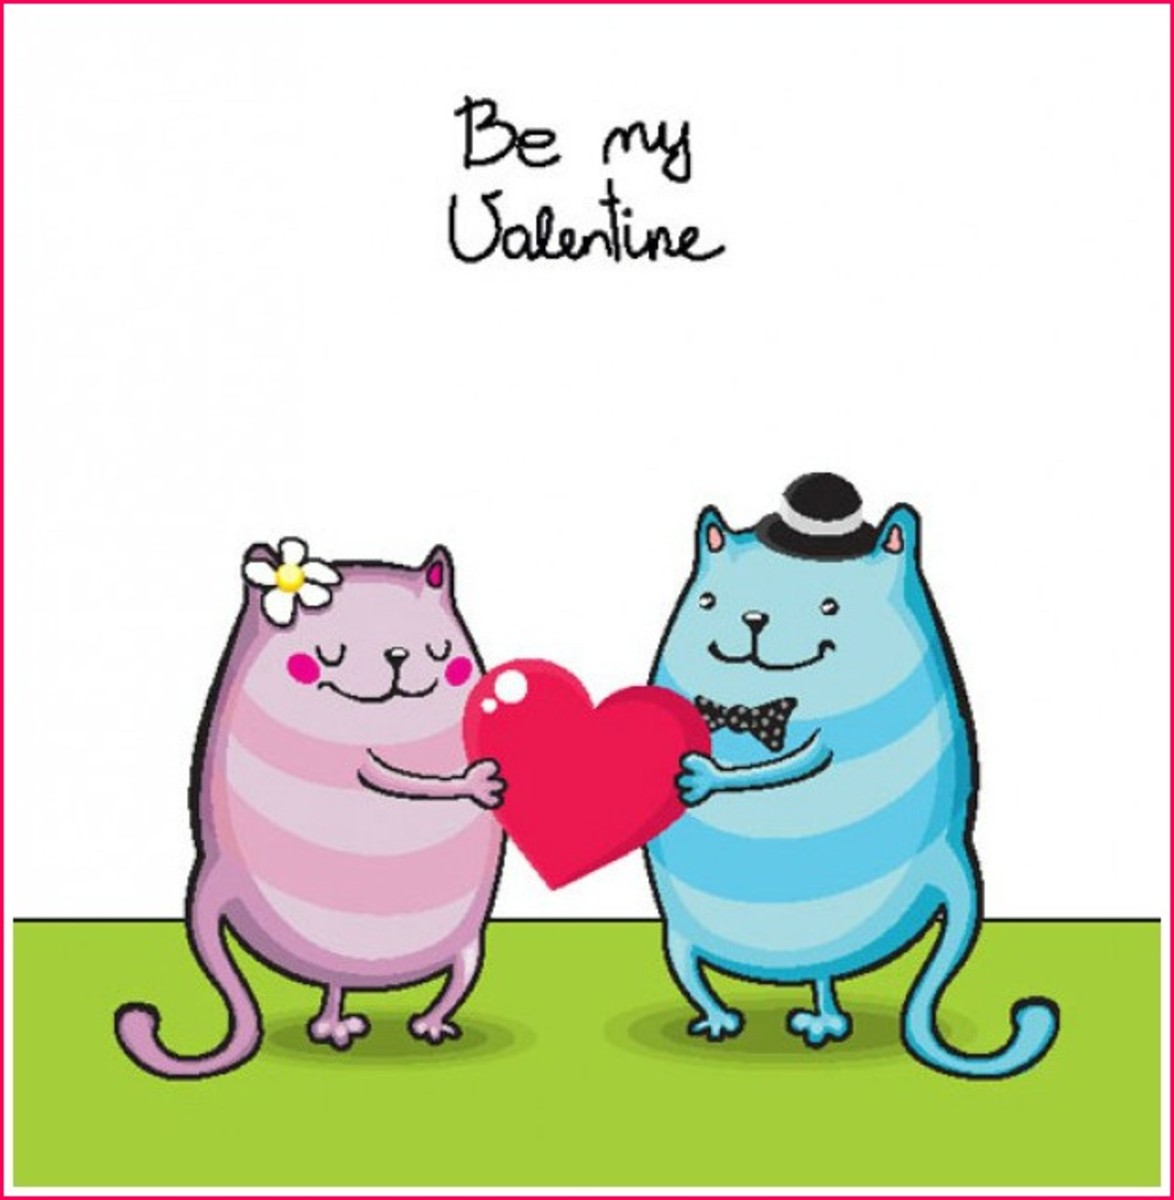 Be my Valentine with Cats